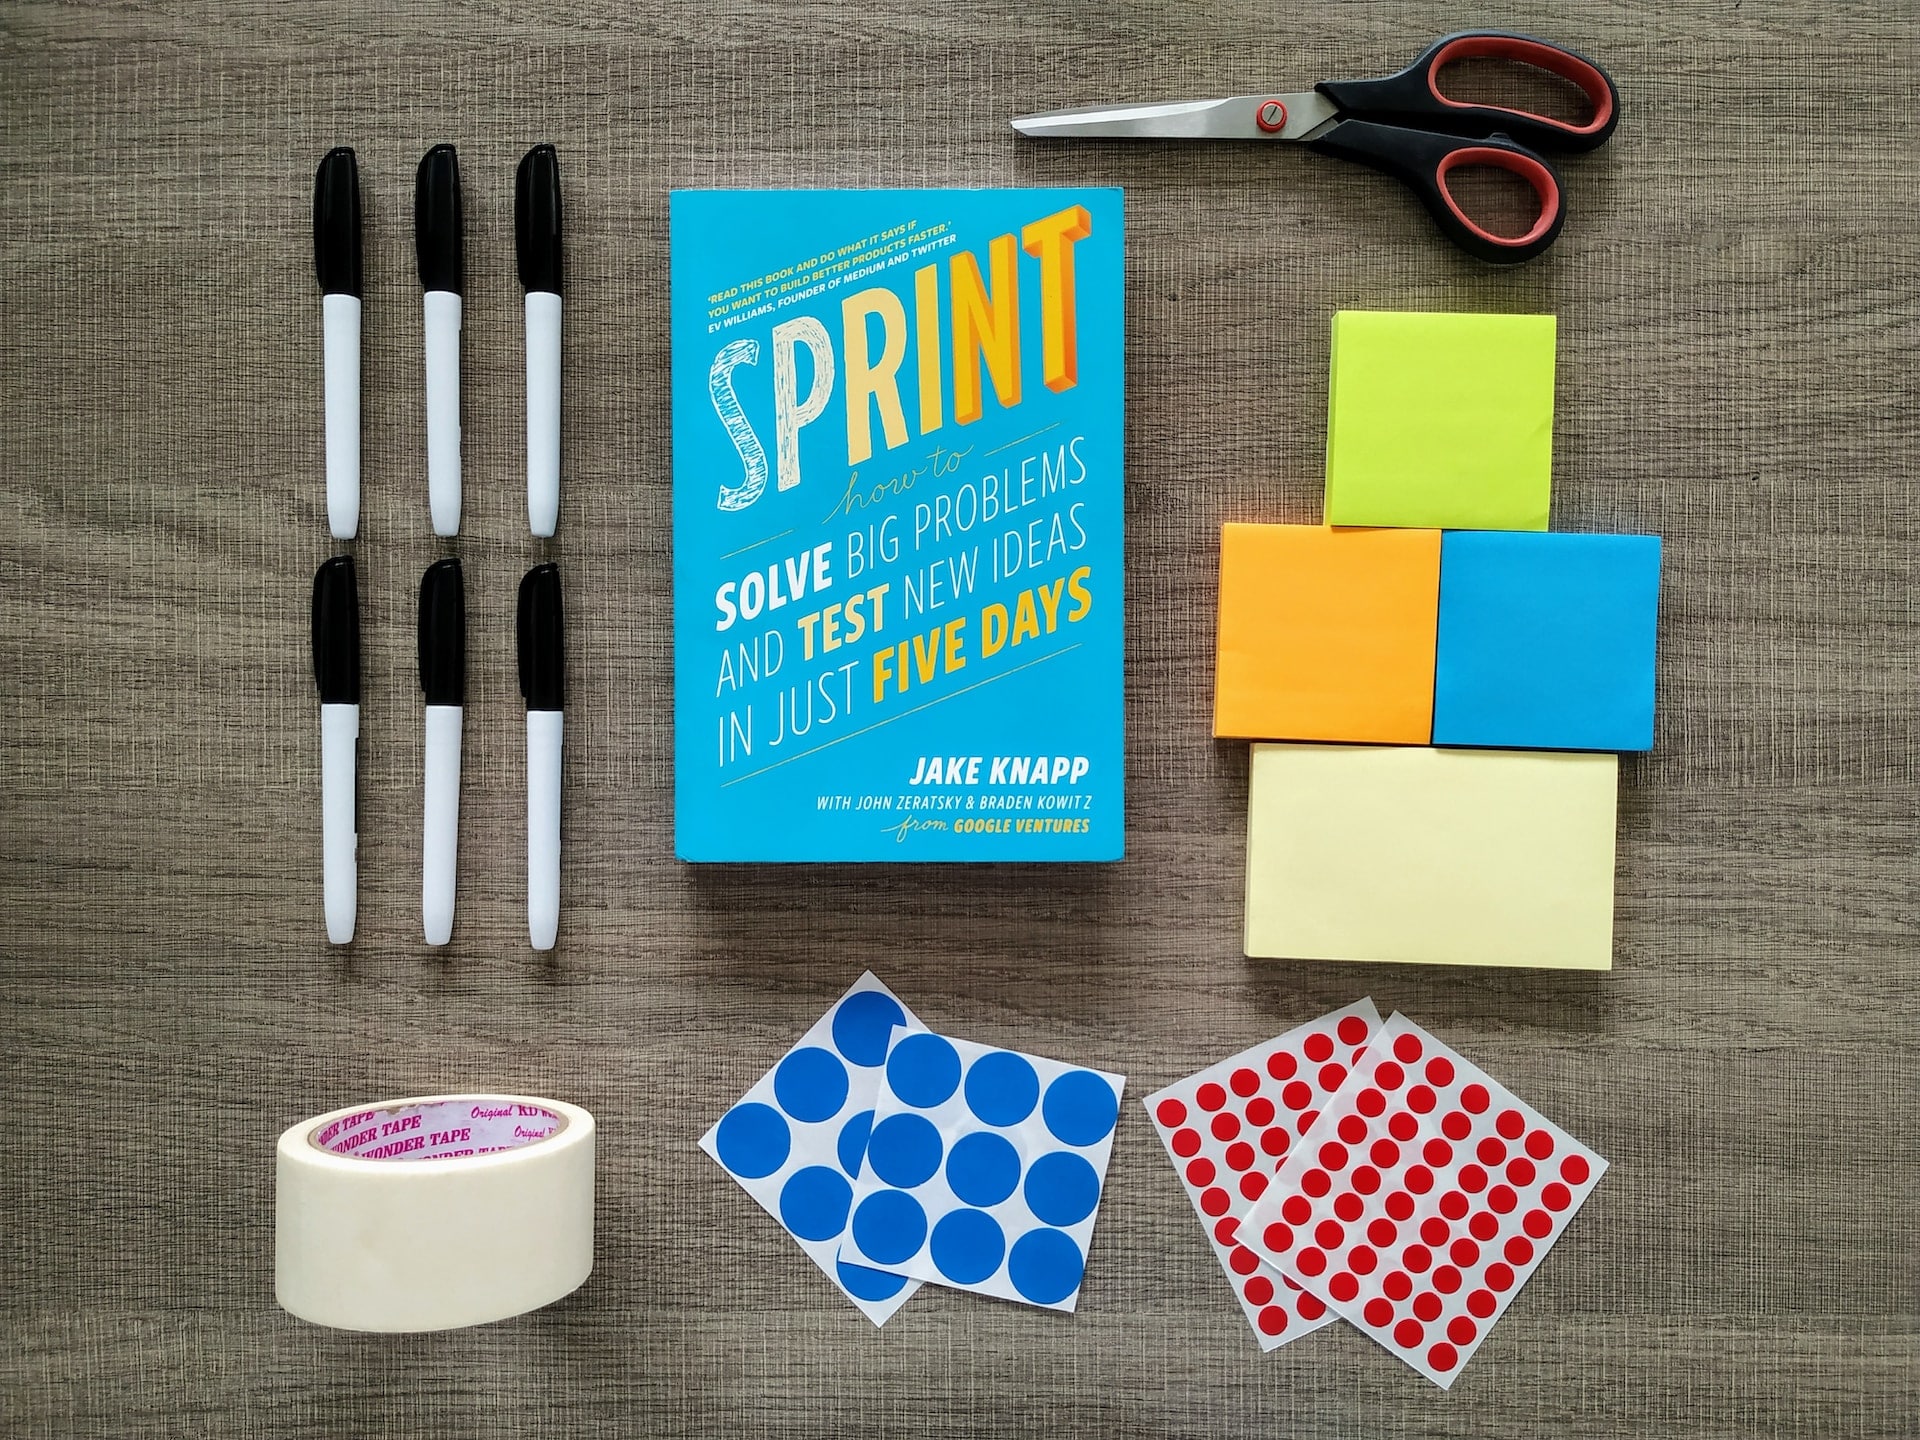 Foto of a desk showing a printed copy of the book "Sprint", a scissors, 6 pens, masking tape, voting dots and four packs of sticky notes.